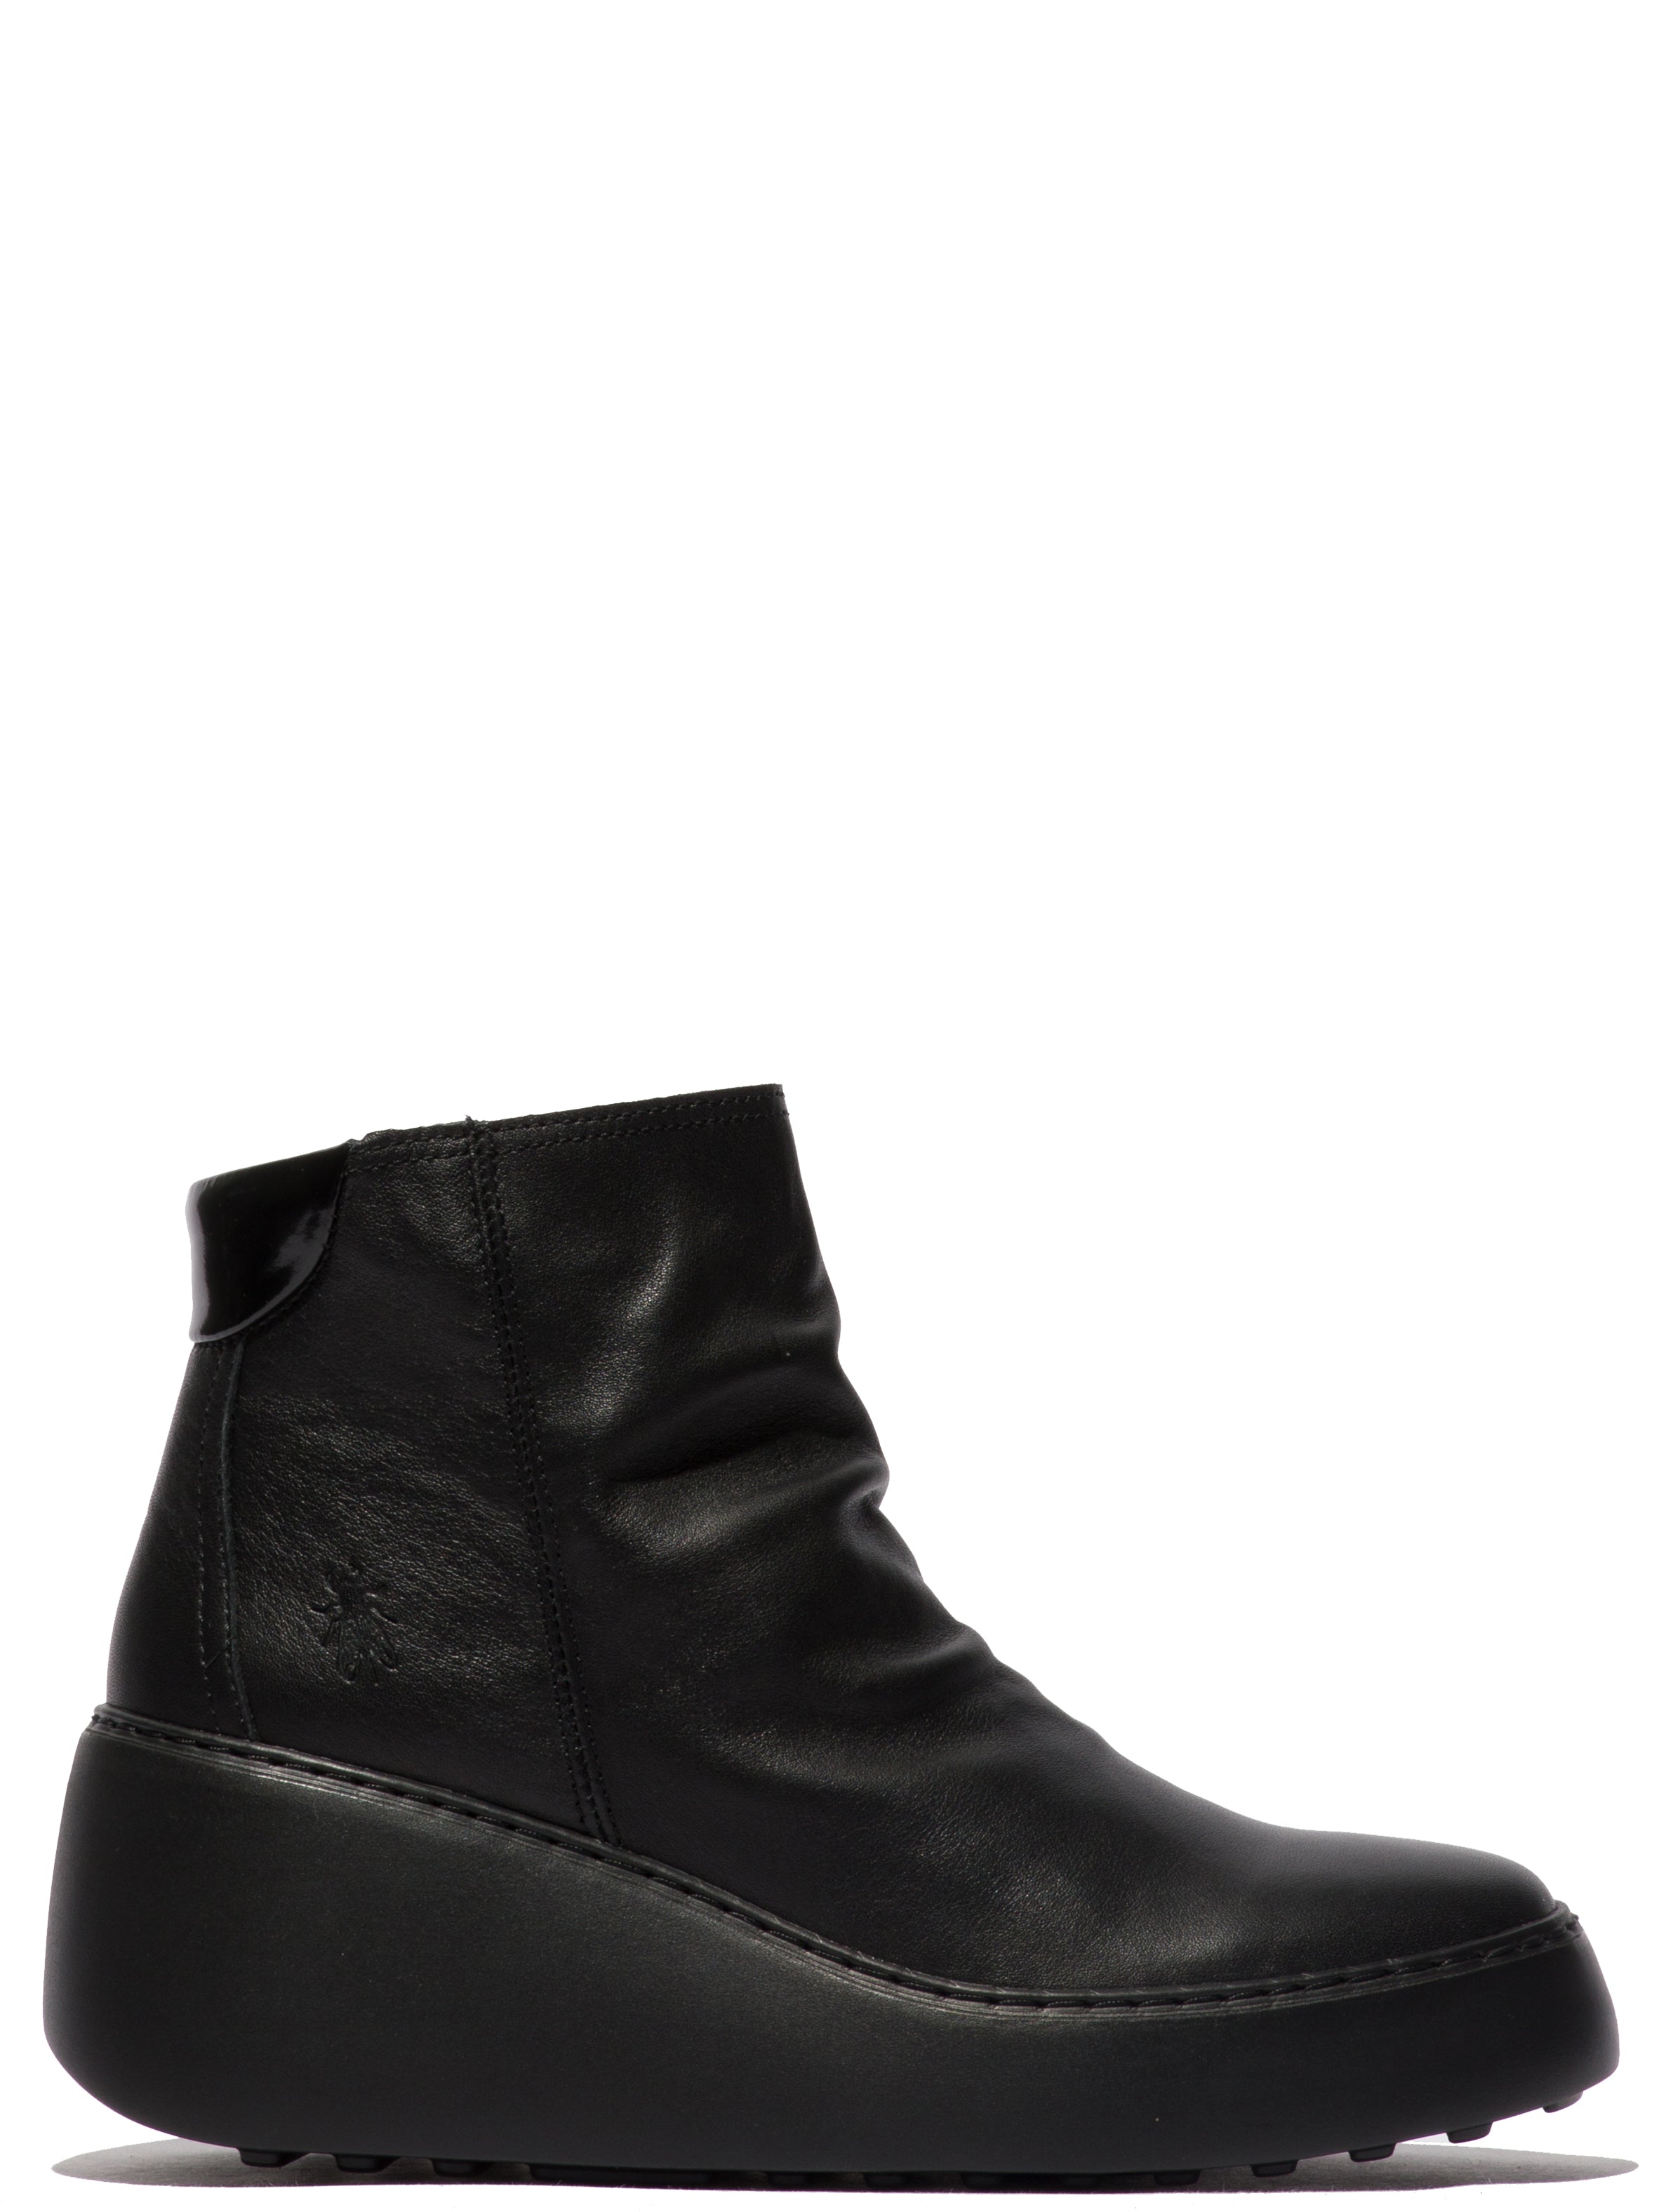 Fly Dabe 461 Ladies Black Leather Side Zip Ankle Boots